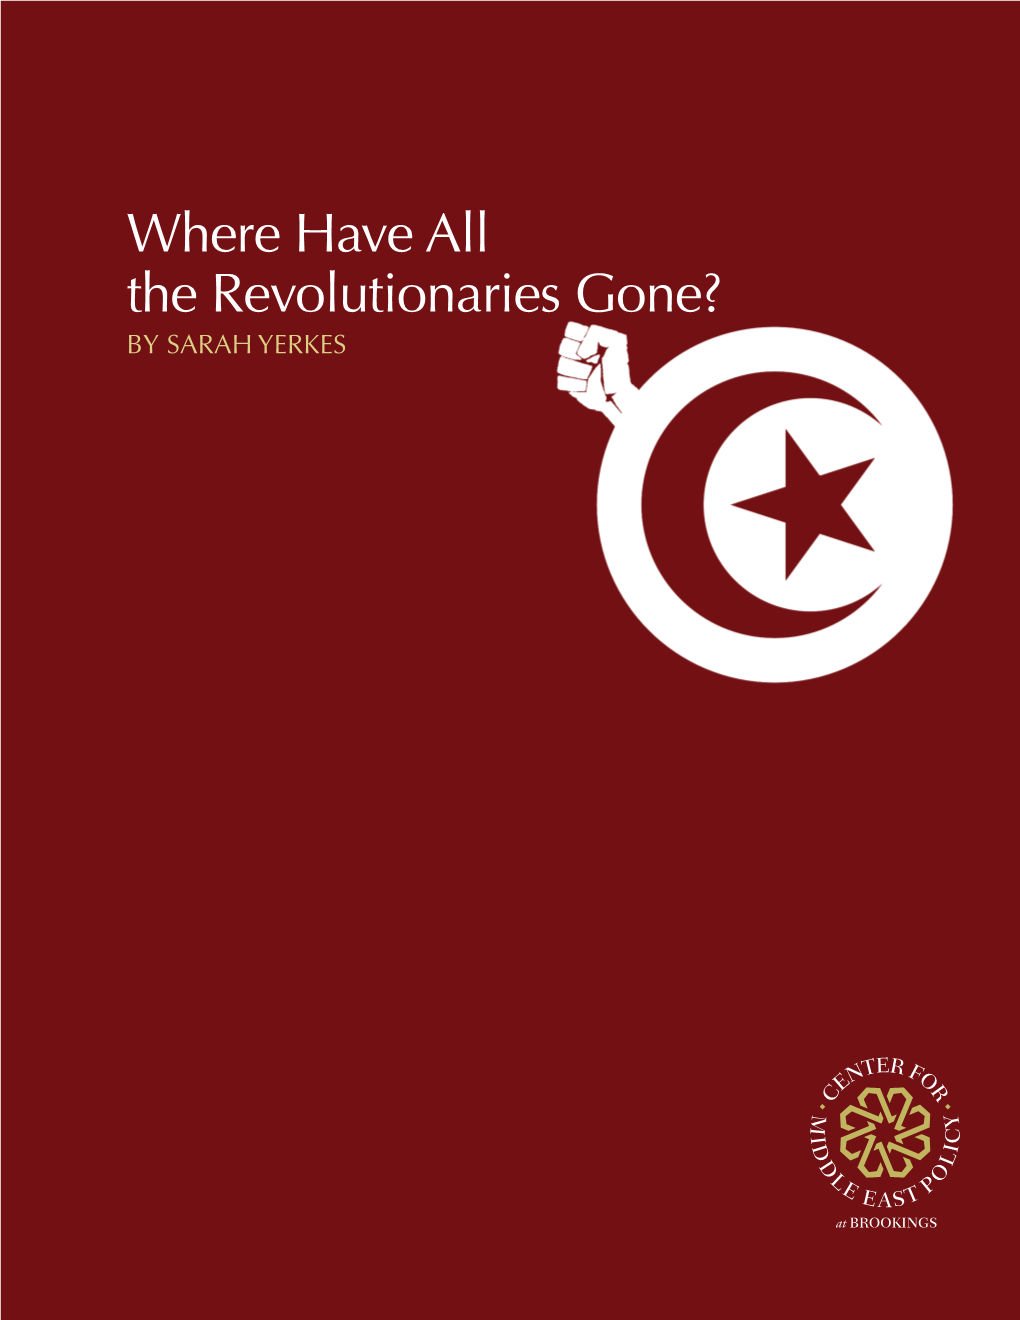 Where Have All the Revolutionaries Gone? by SARAH YERKES